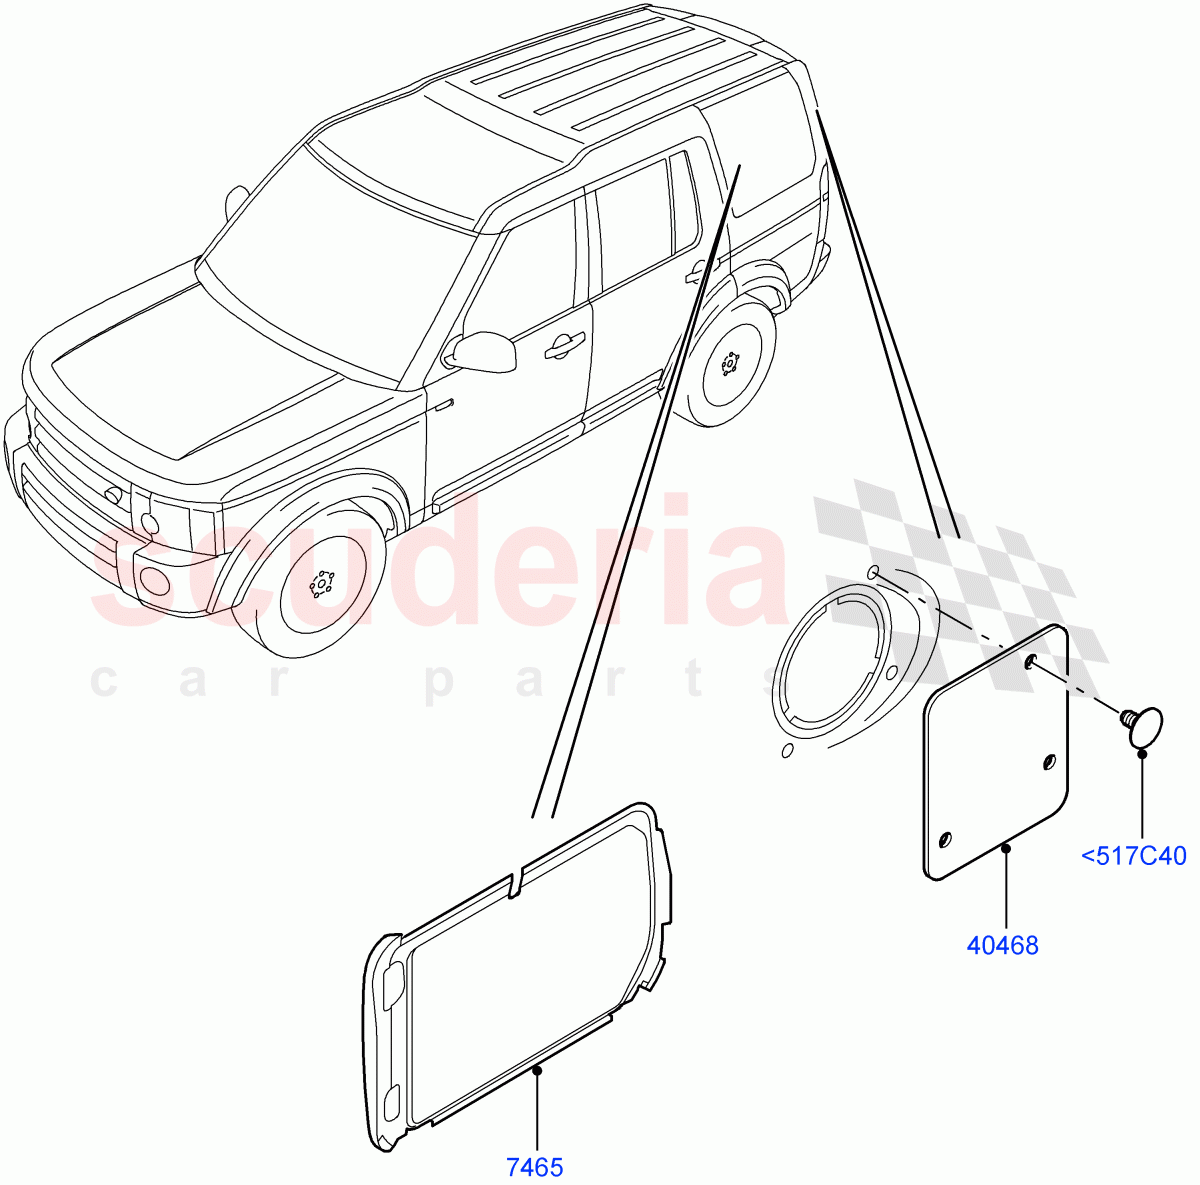 Quarter Windows(Commercial)(With 2 Seat Configuration)((V)FROMAA000001) of Land Rover Land Rover Discovery 4 (2010-2016) [5.0 OHC SGDI NA V8 Petrol]